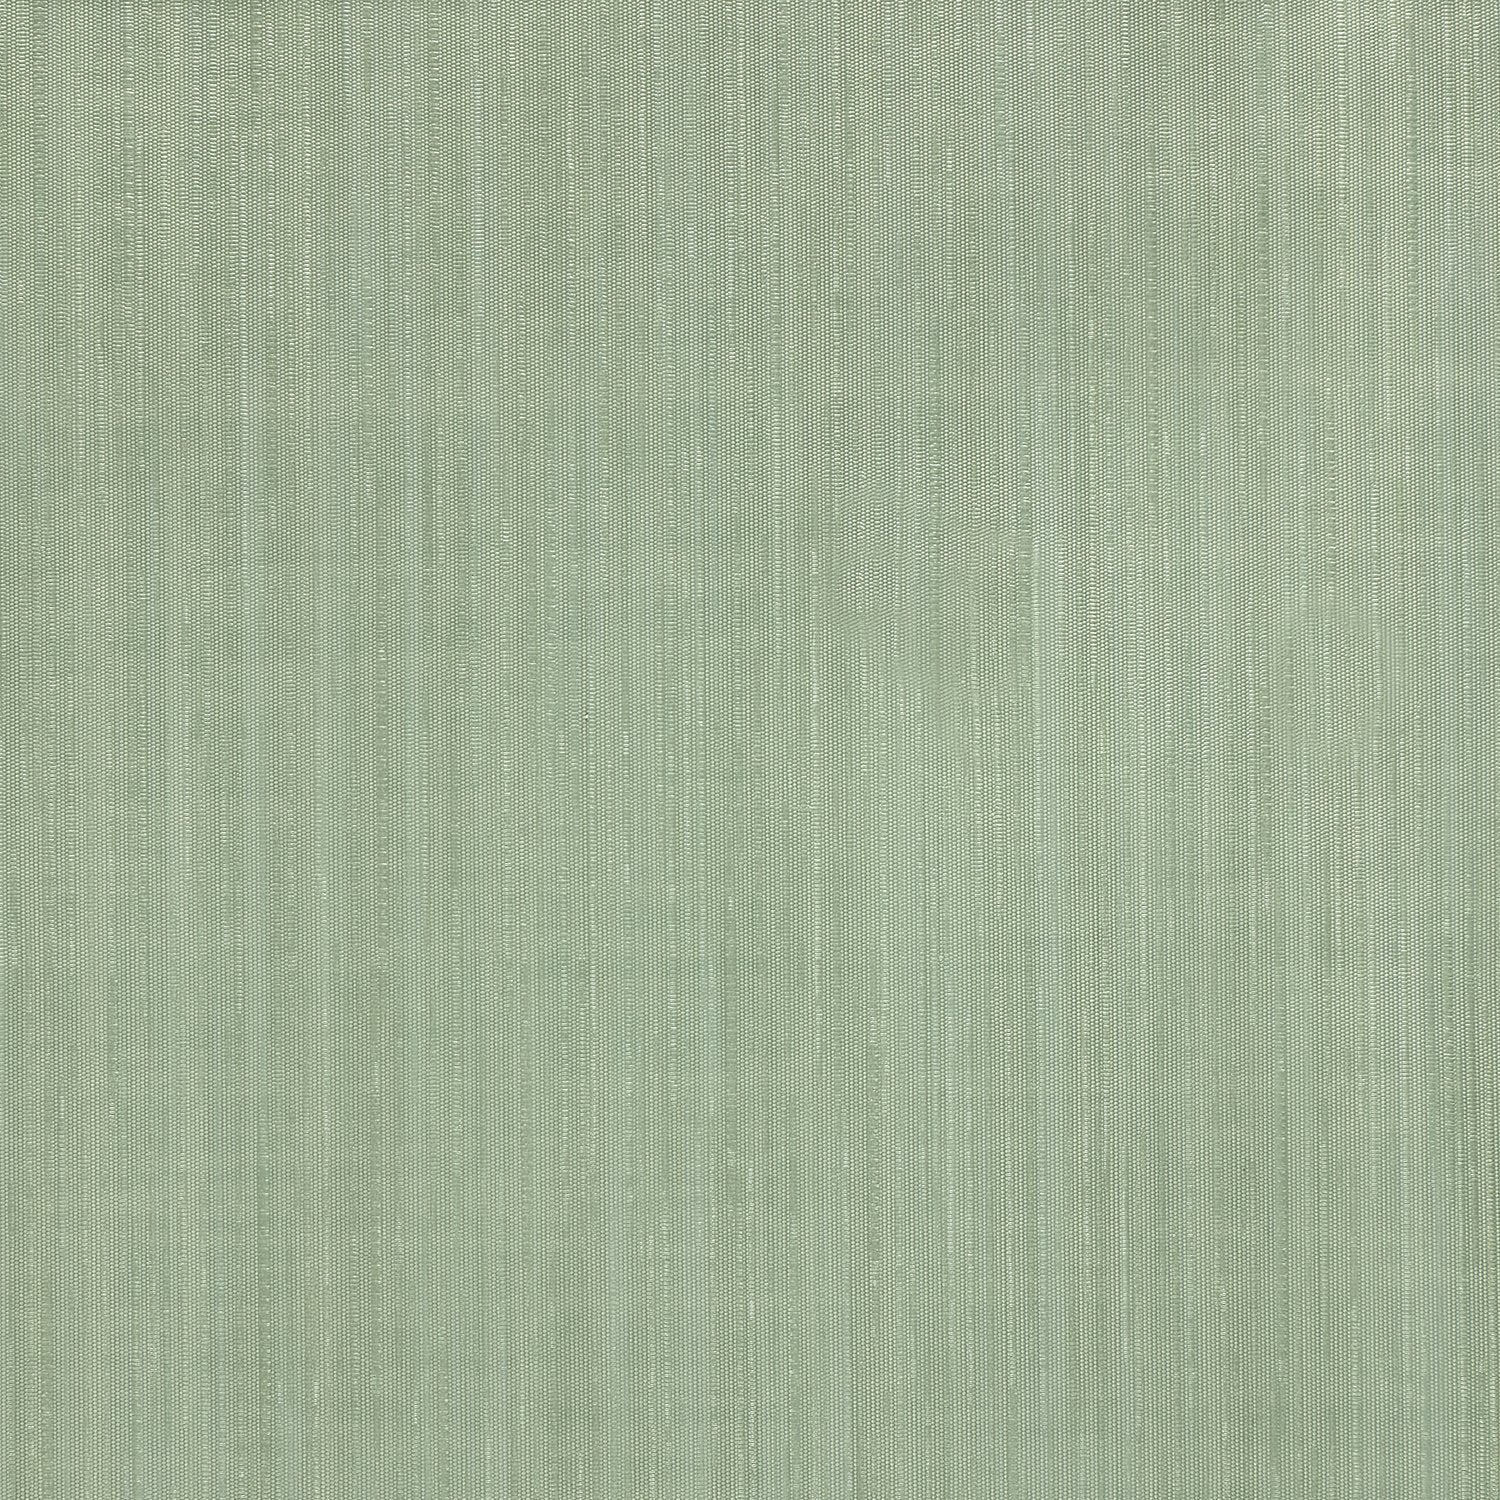 Skyward - Y47387 - Wallcovering - Vycon - Kube Contract